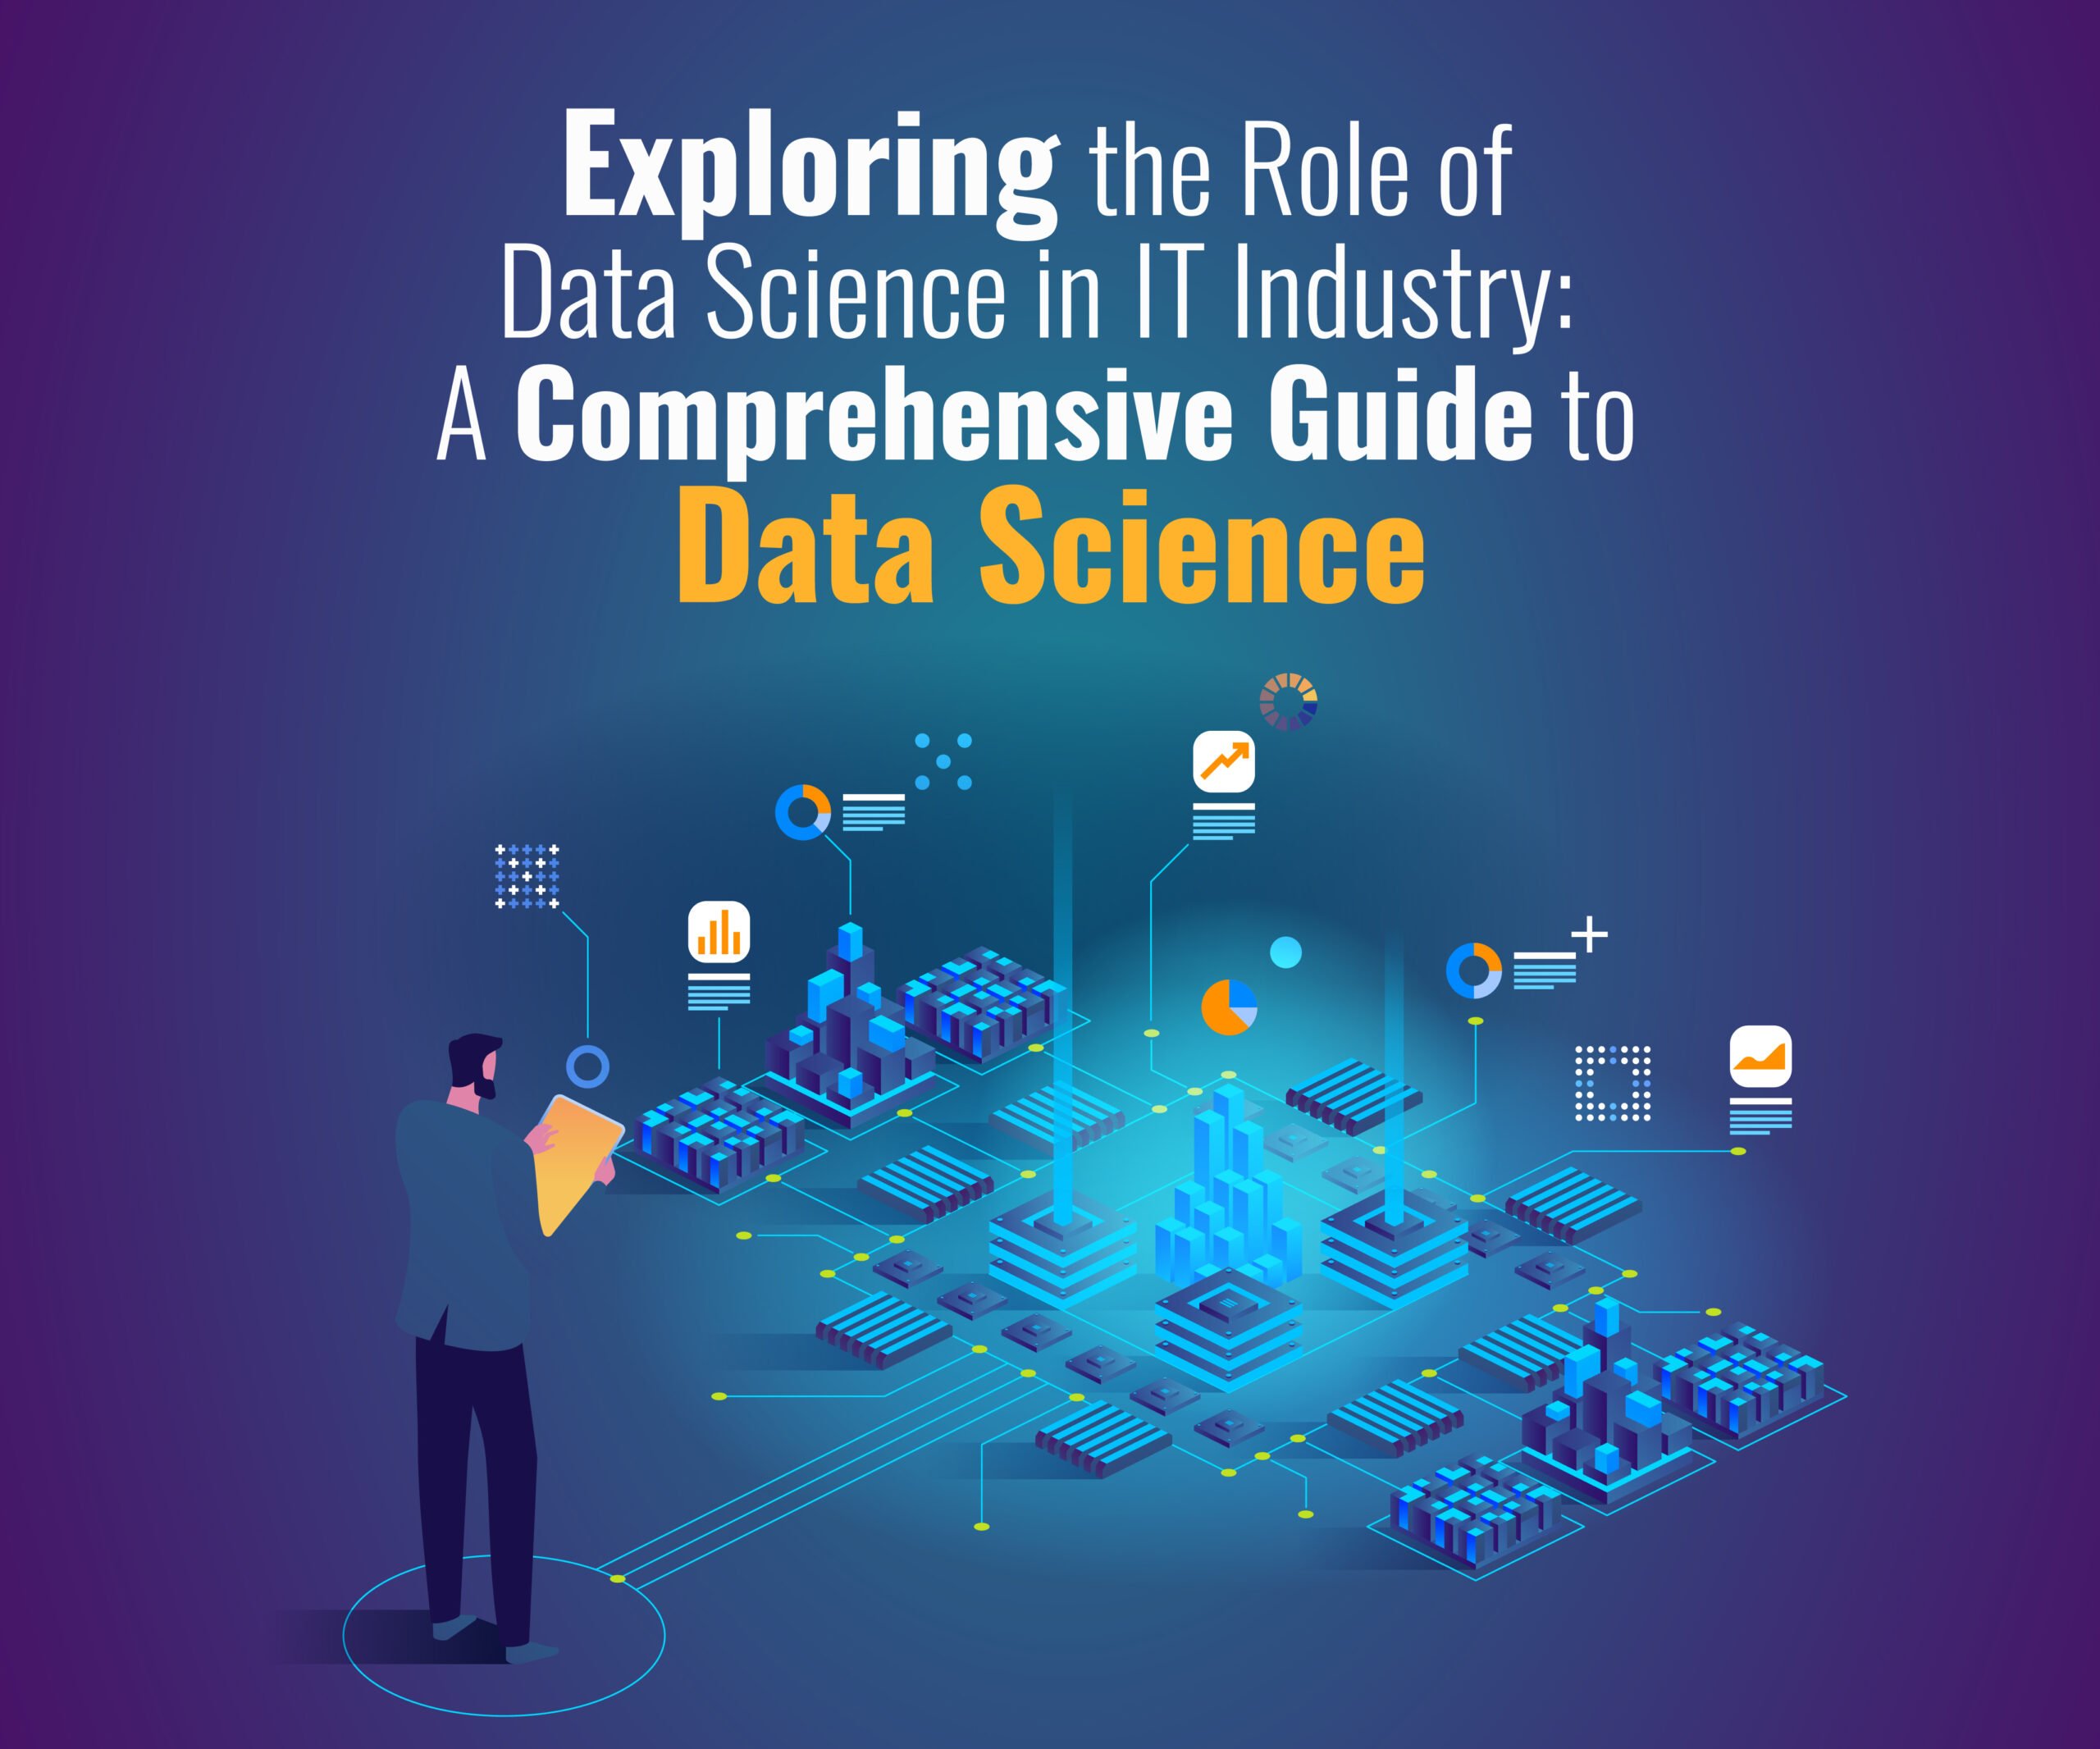 An infographic depicting various aspects of data science